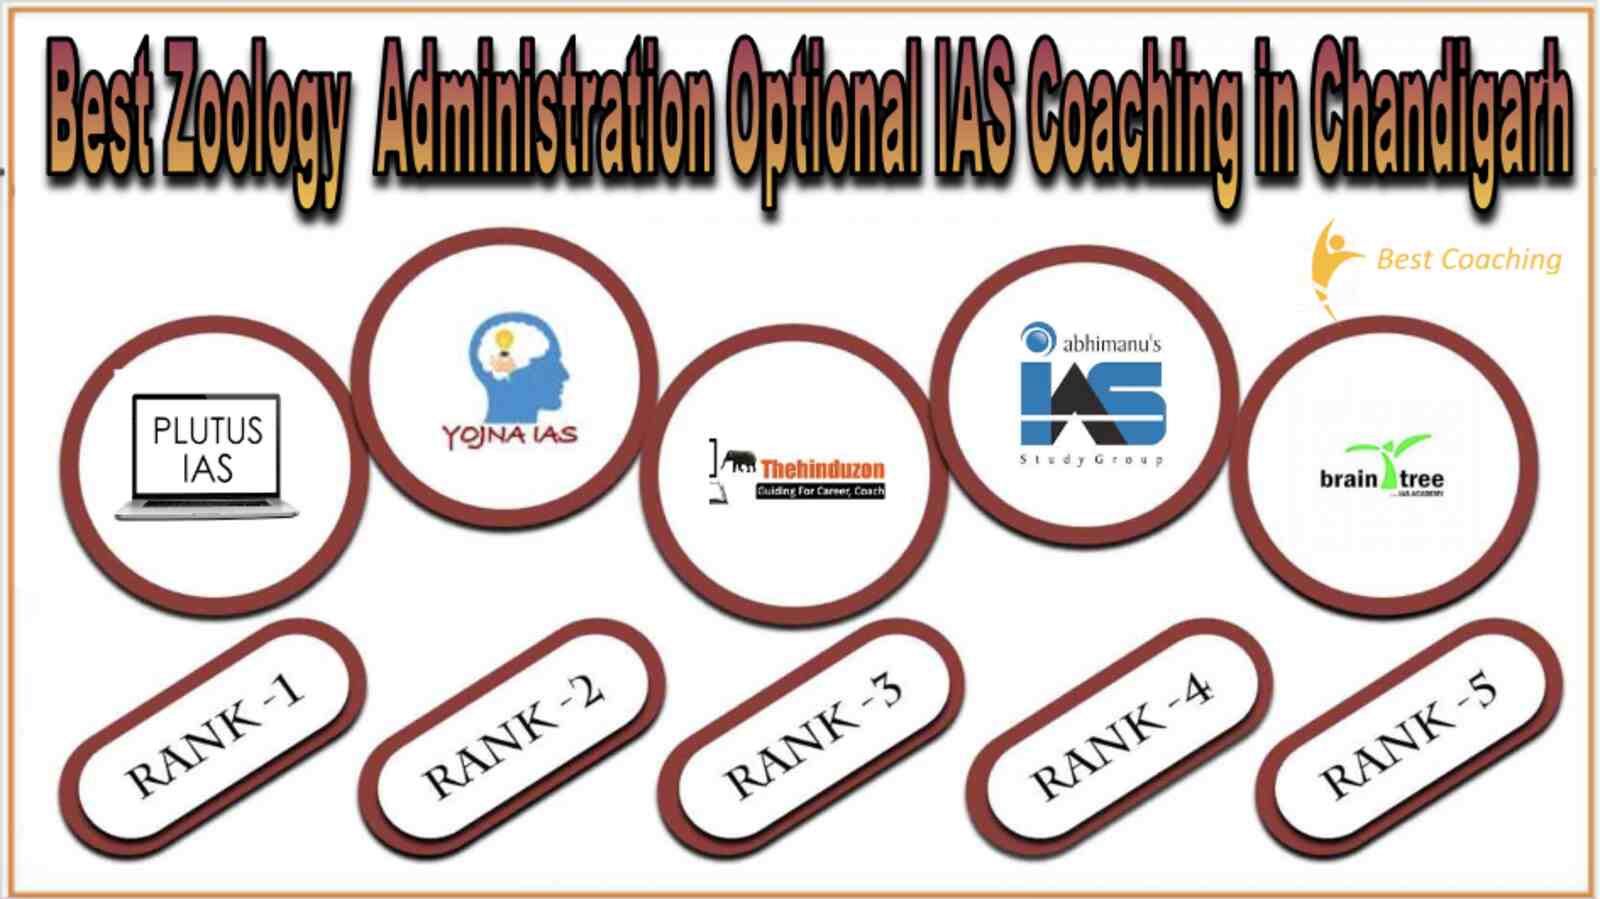 Best Zoology Optional IAS Coaching in Chandigarh